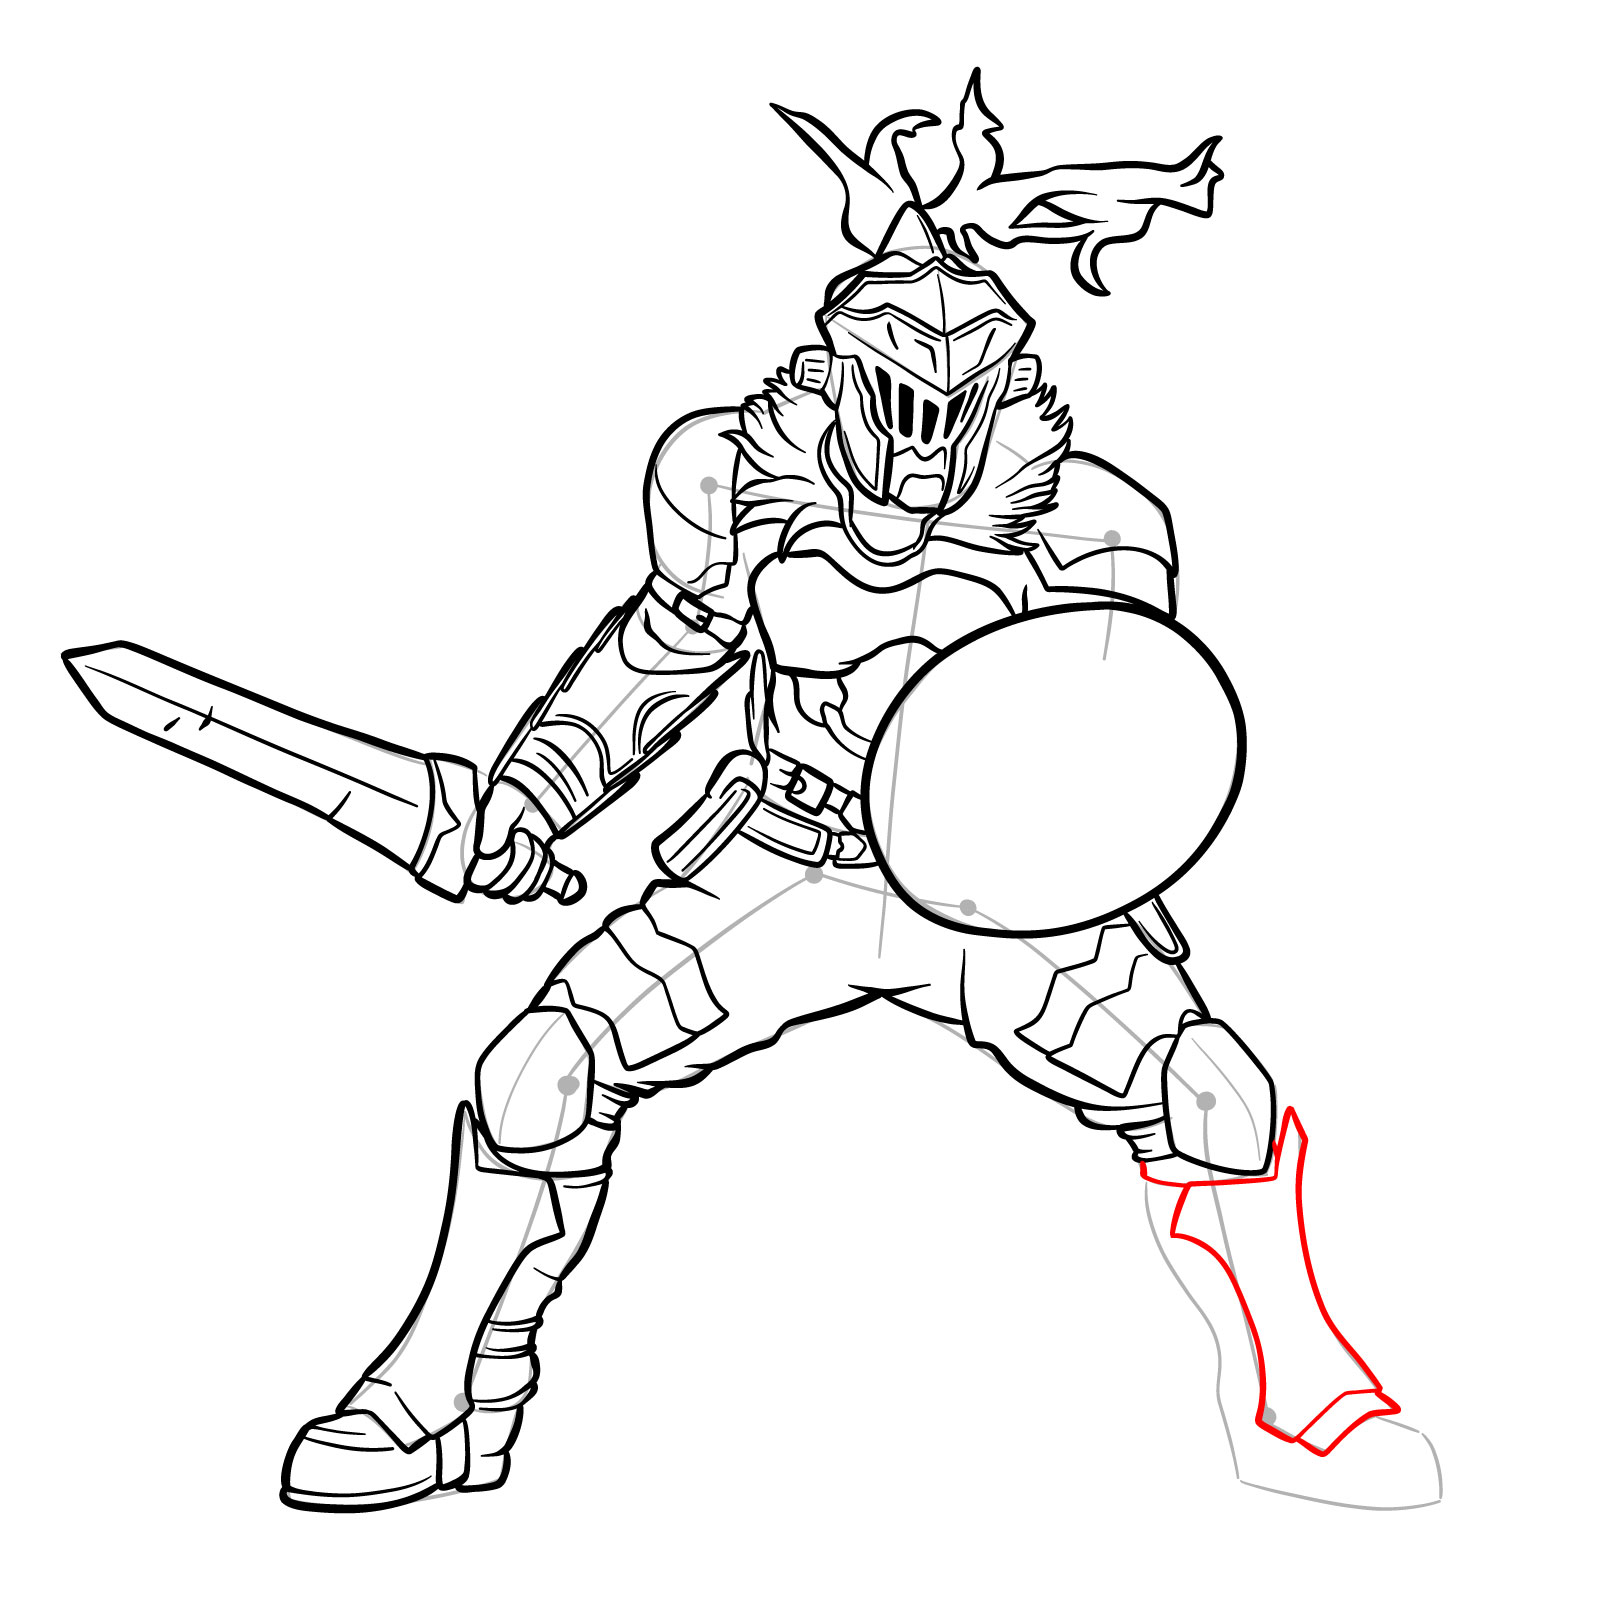 How to Draw Goblin Slayer in battle stance - step 35